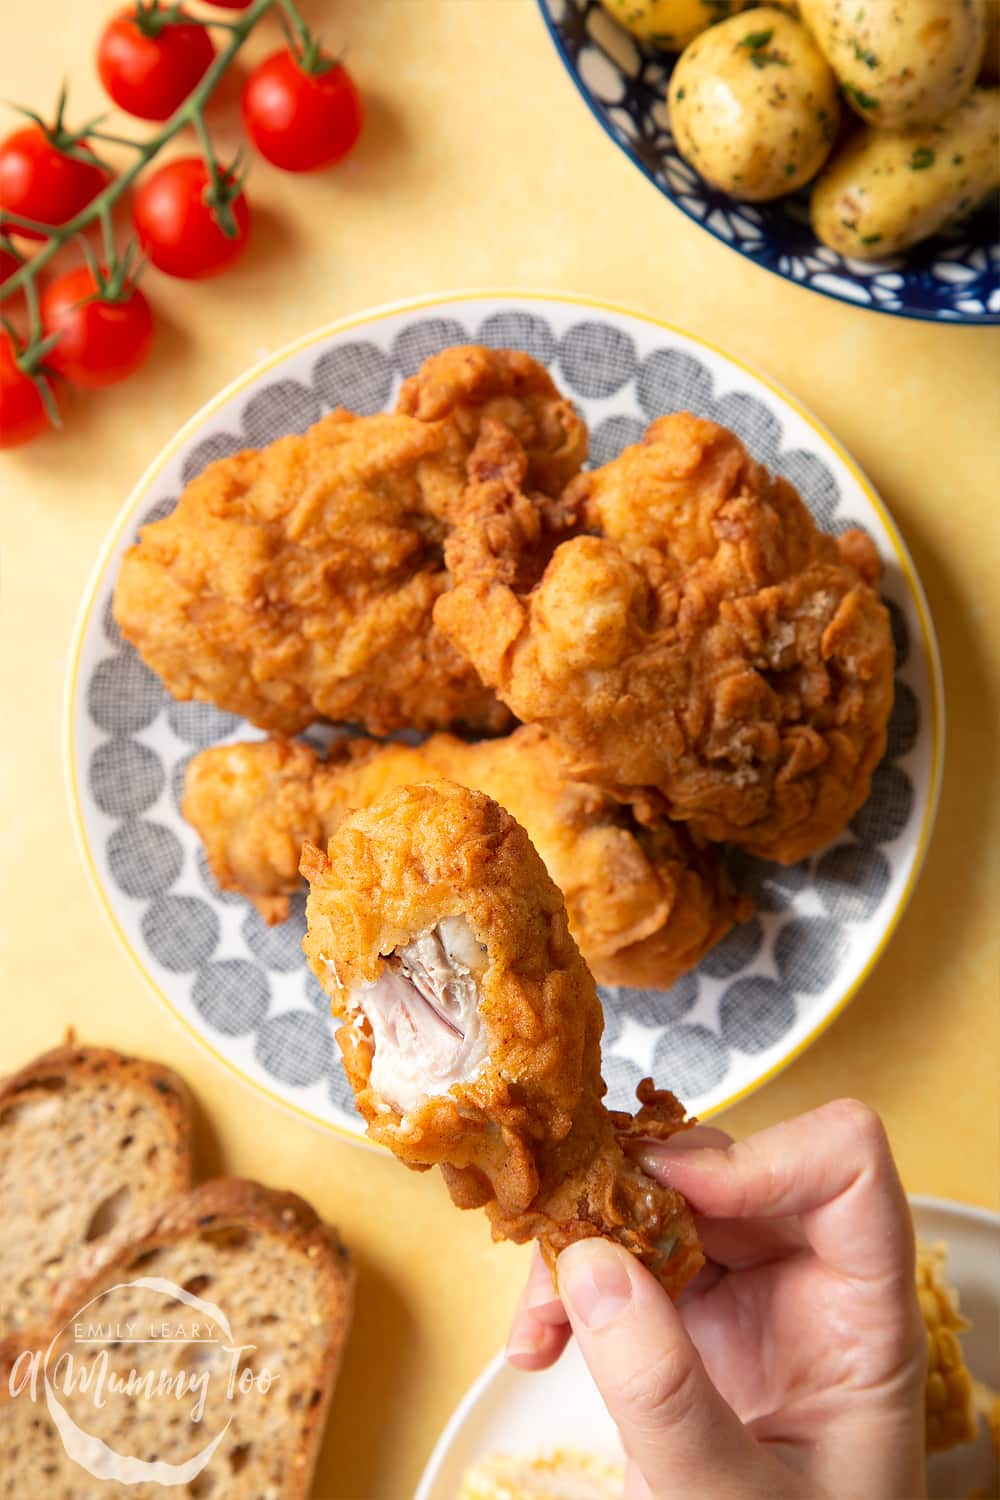 Buttermilk Fried Chicken Gordon Ramsay S Recipe A Mummy Too,Coin Shops In Tucson